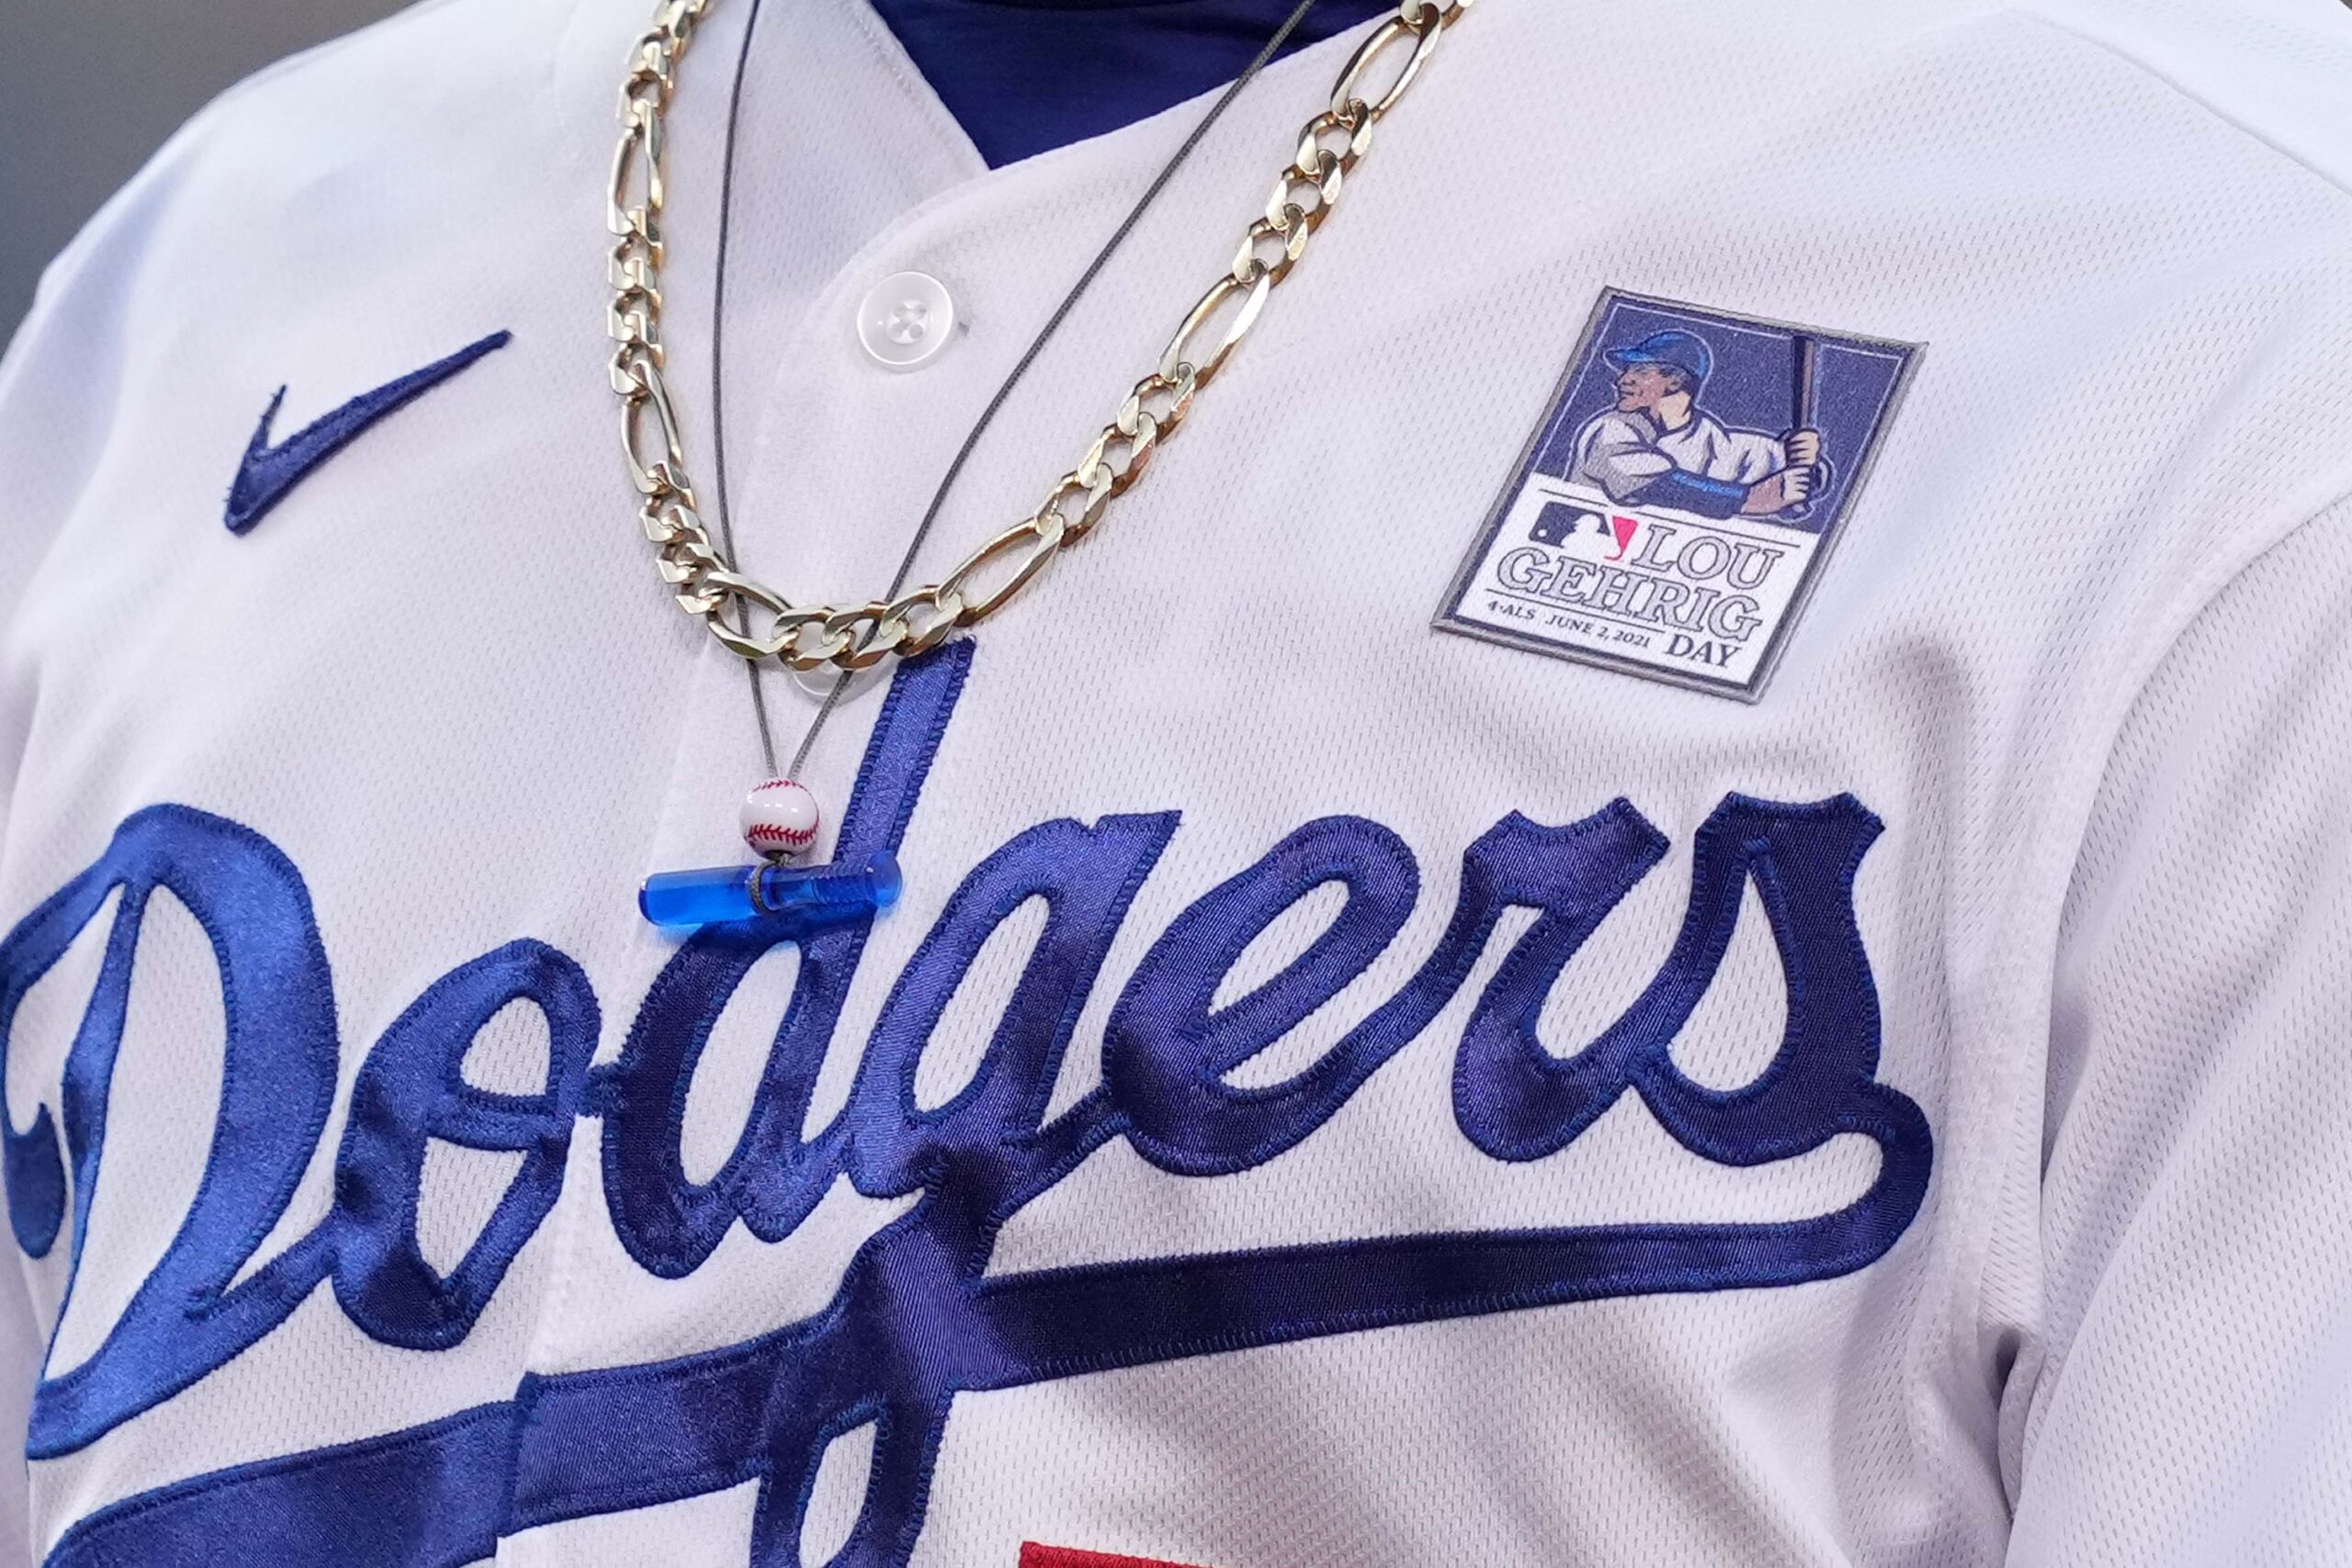 Dodgers Get One Step Closer to Sponsorship Patch on their Uniforms